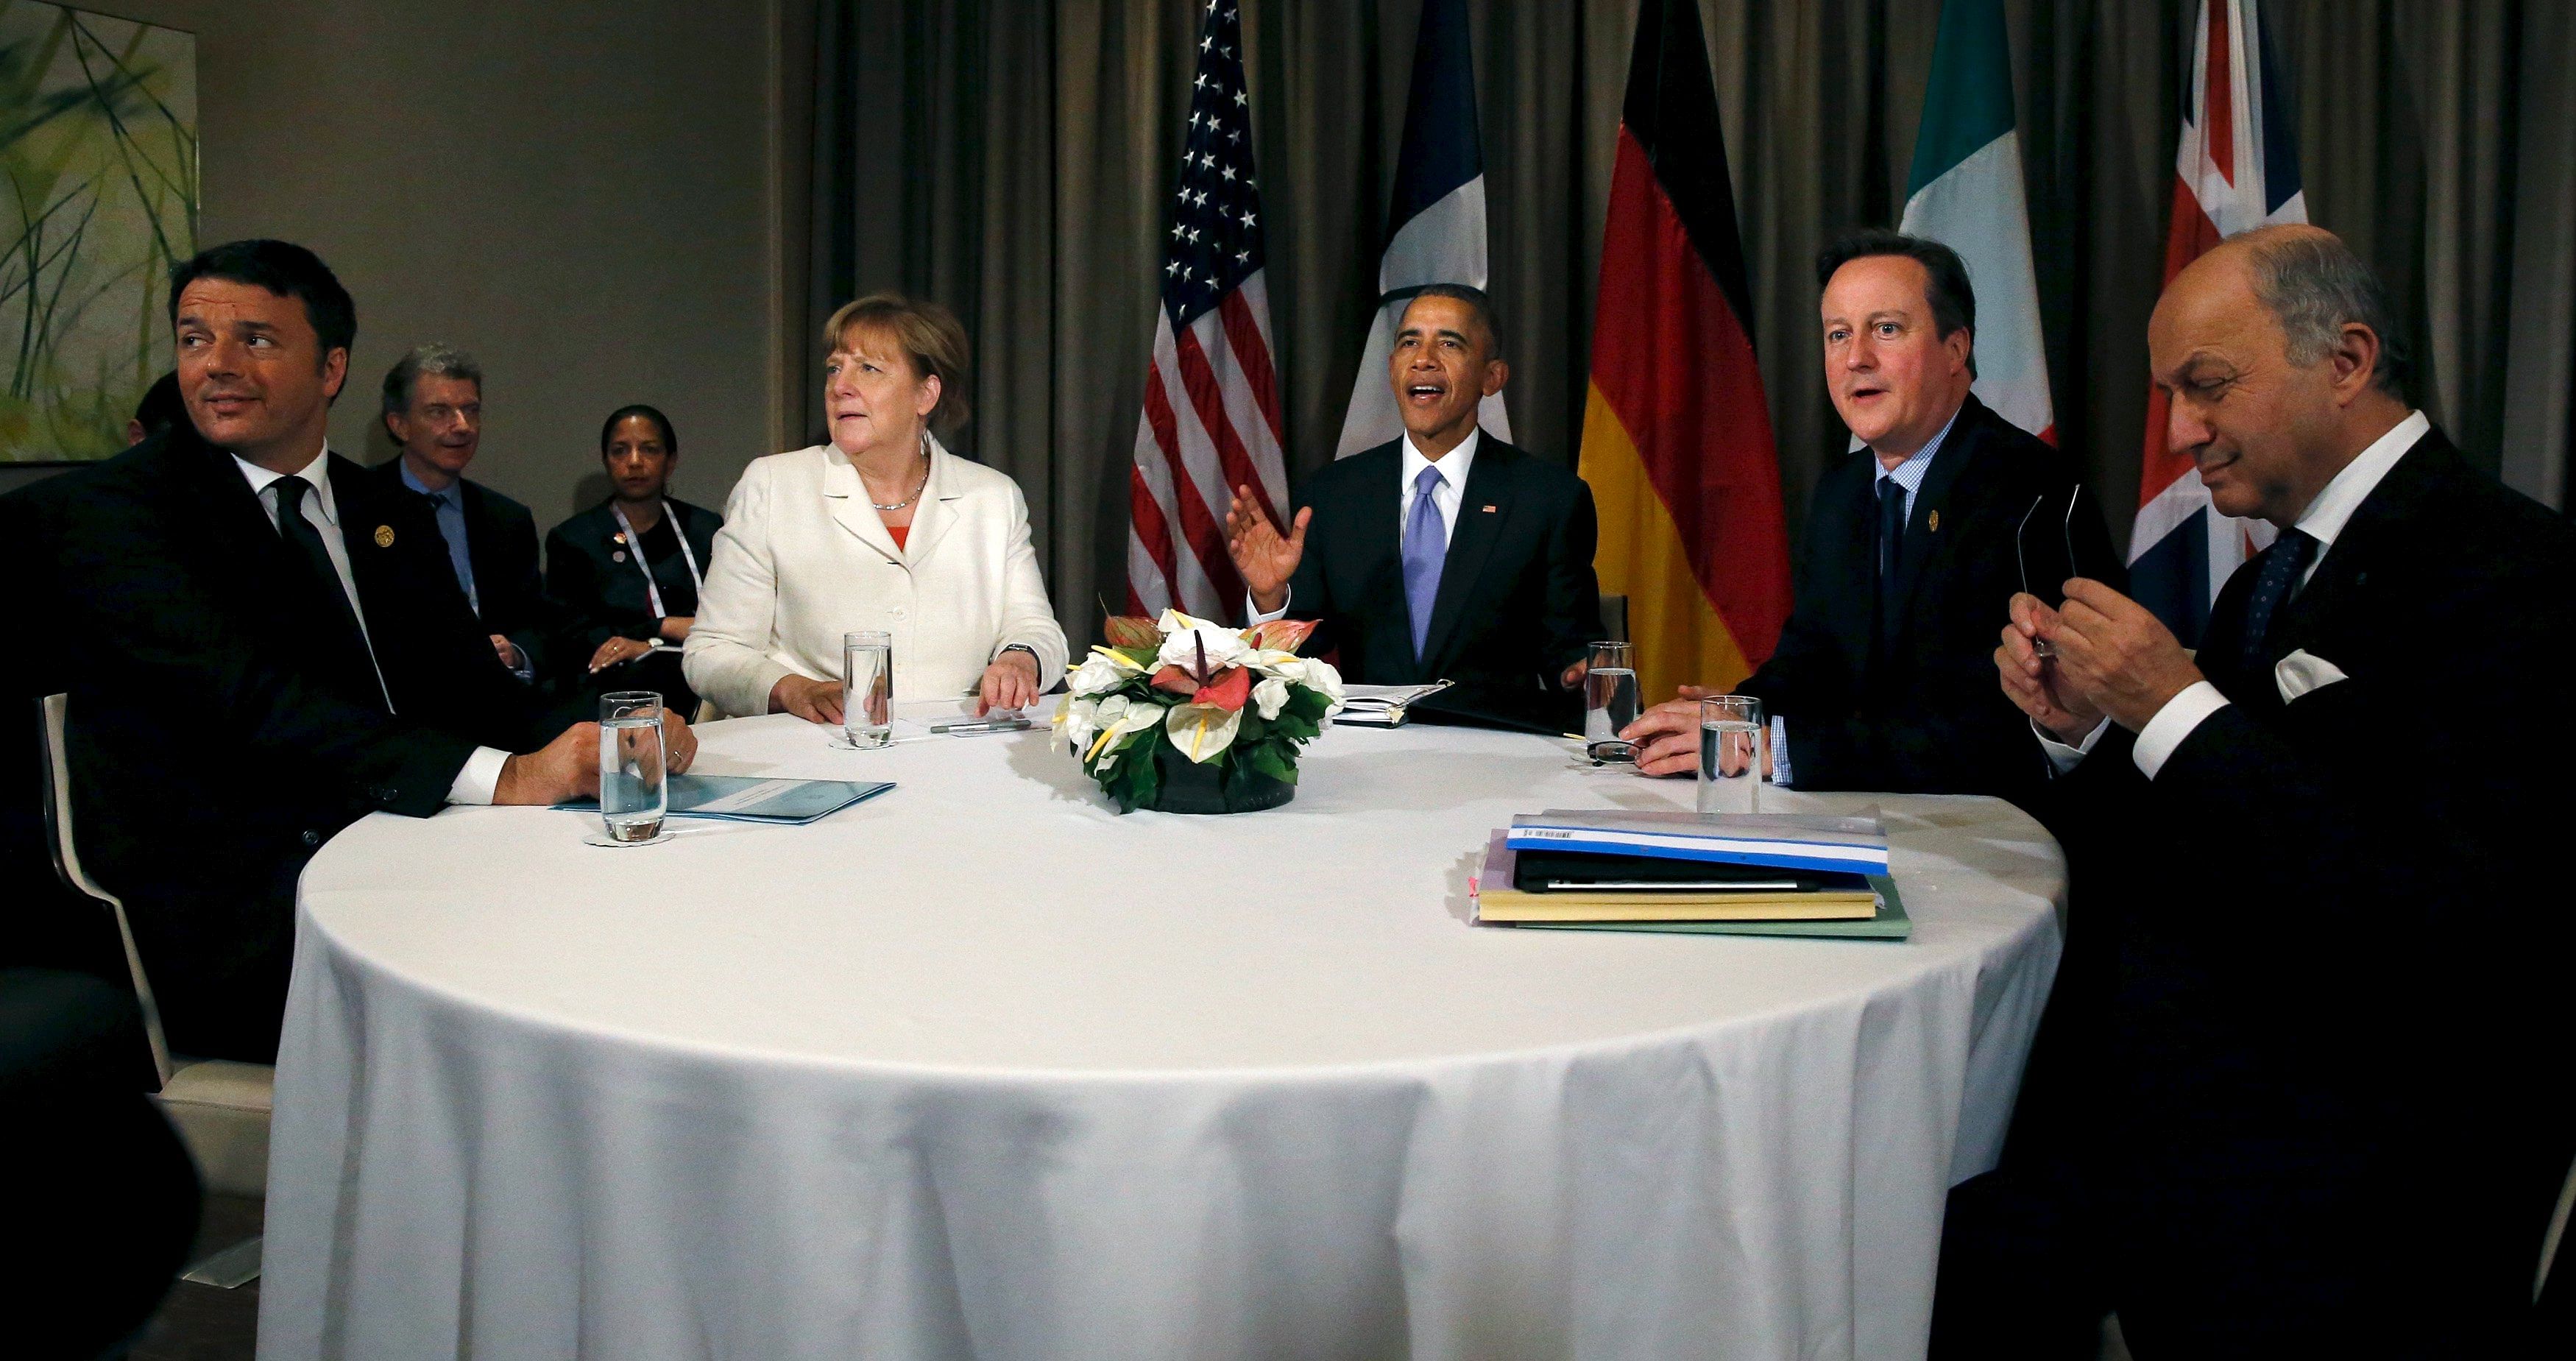 (From left) Italy's Prime Minister Matteo Renzi, Germany's Chancellor Angela Merkel, US President Barack Obama, Britain's Prime Minister David Cameron and France's Foreign Minister Laurent Fabius at a multilateral meeting yesterday.